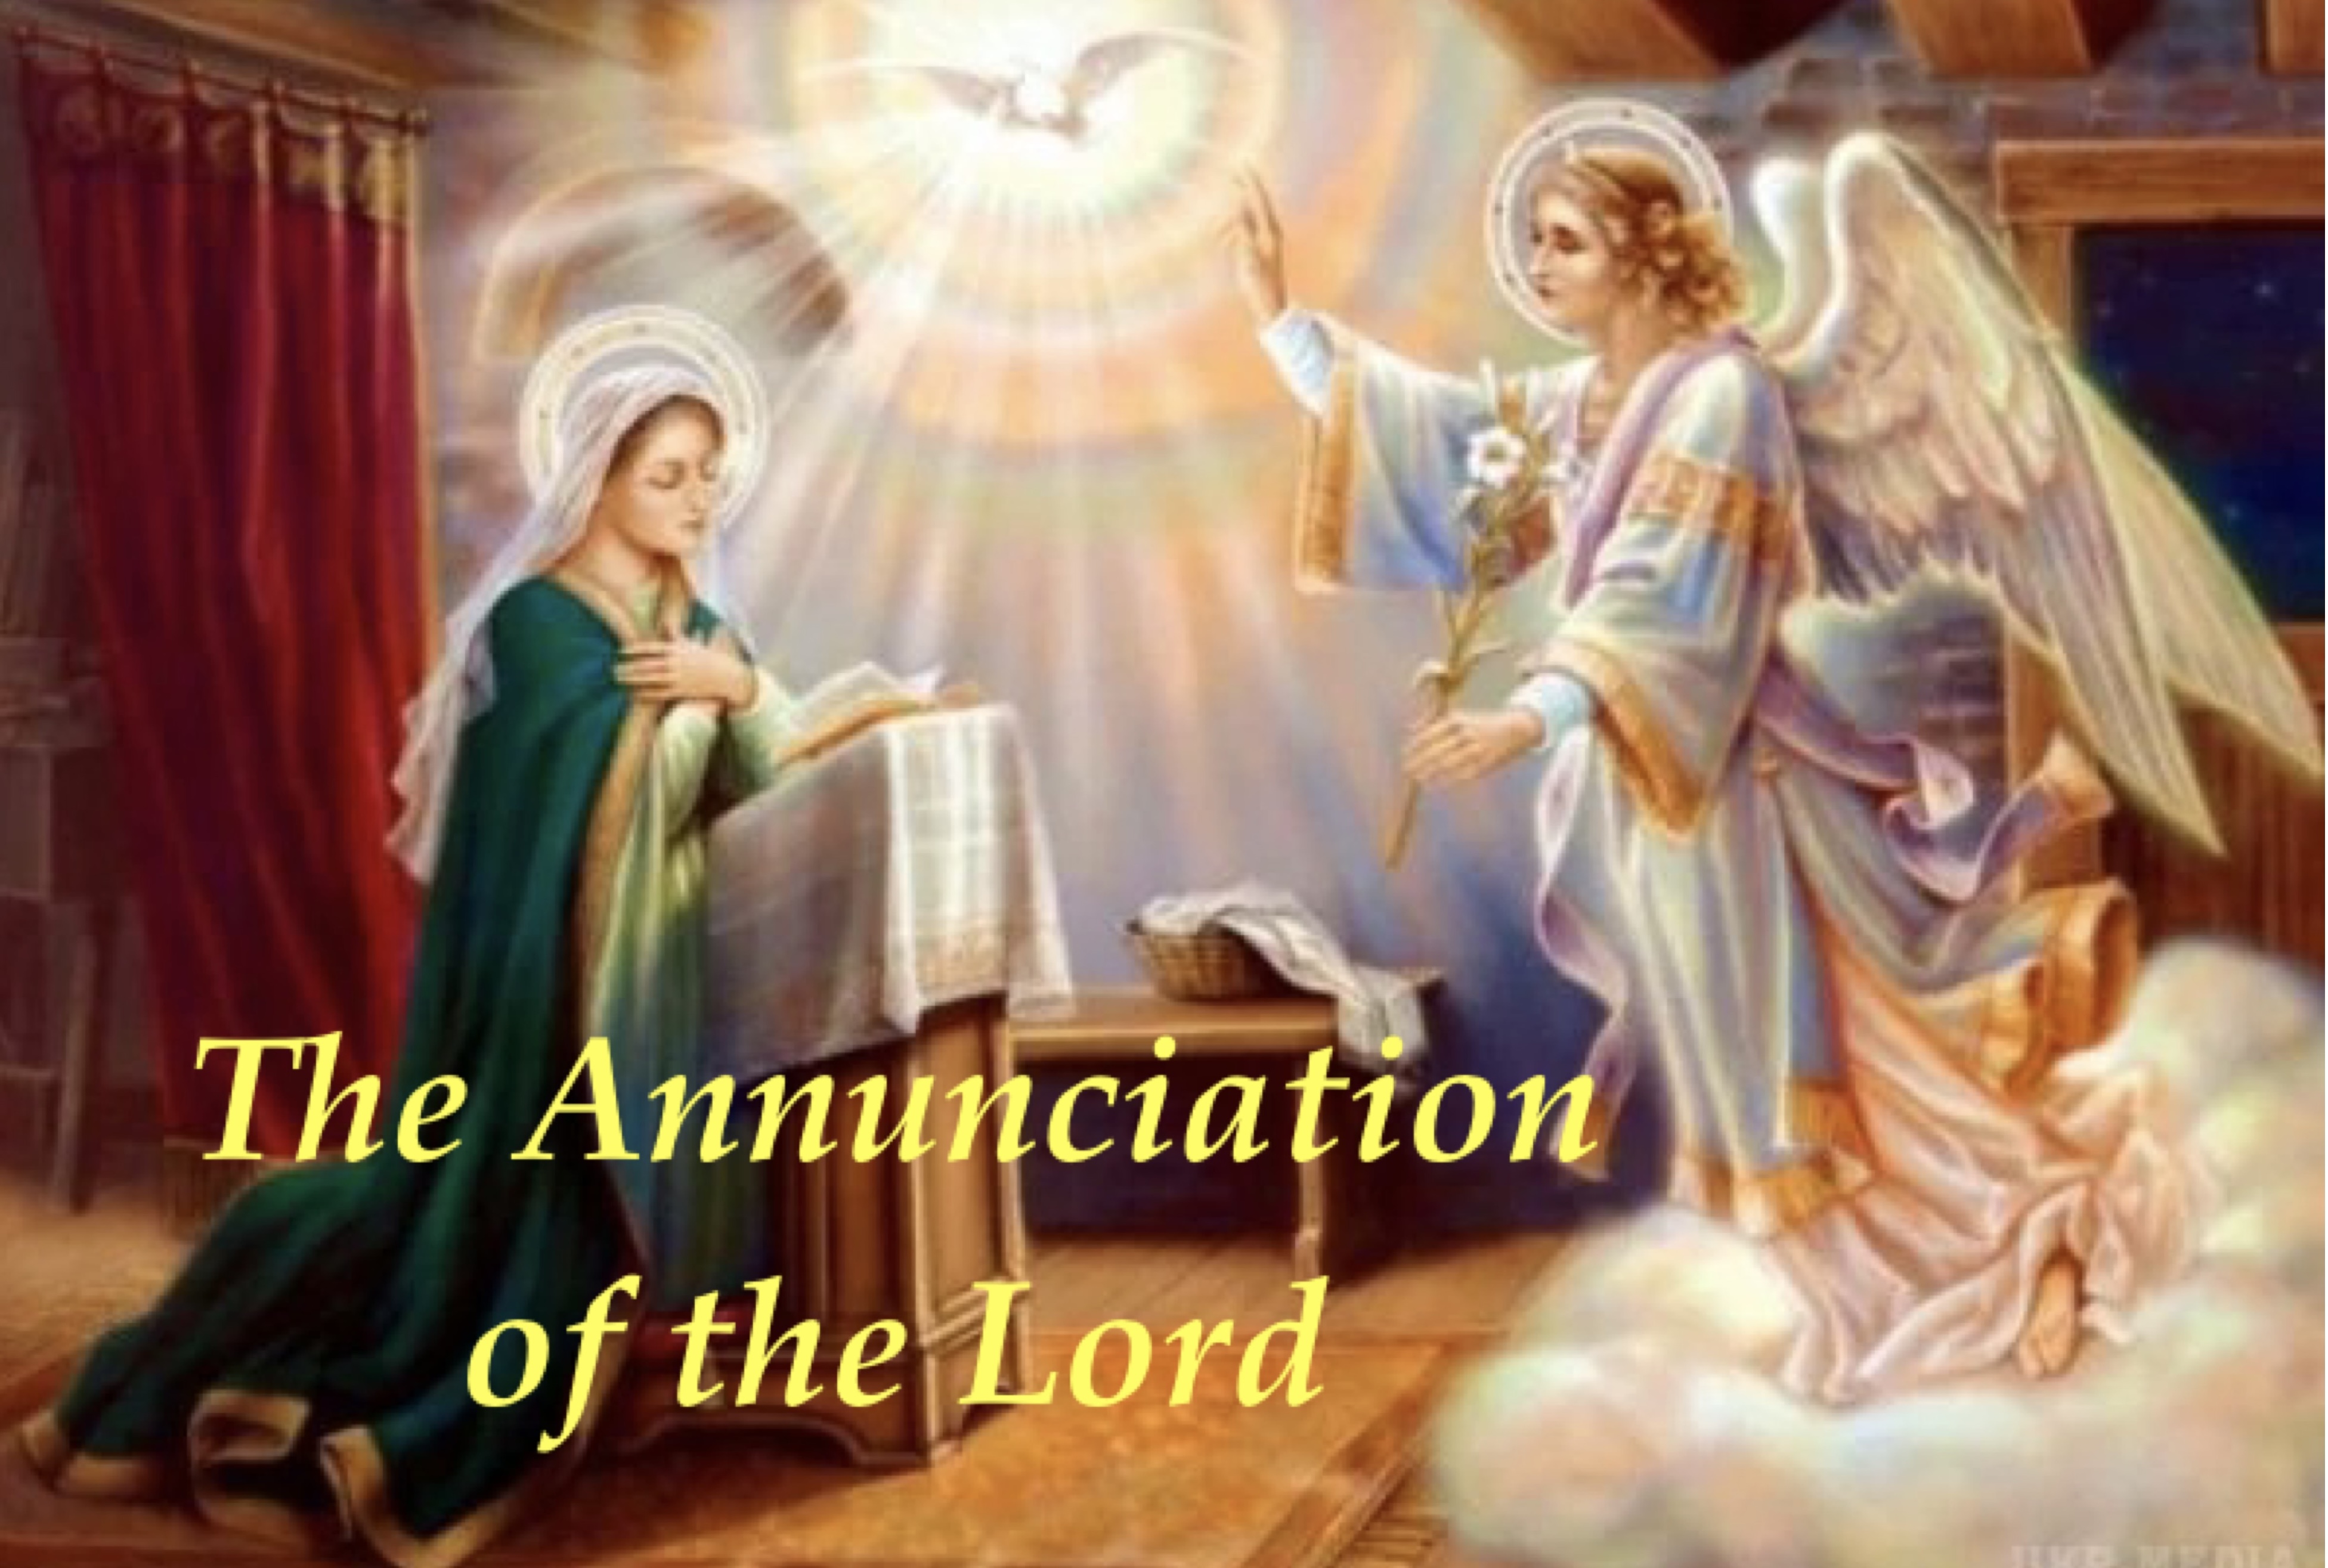 25th March - The Annunciation of the Lord